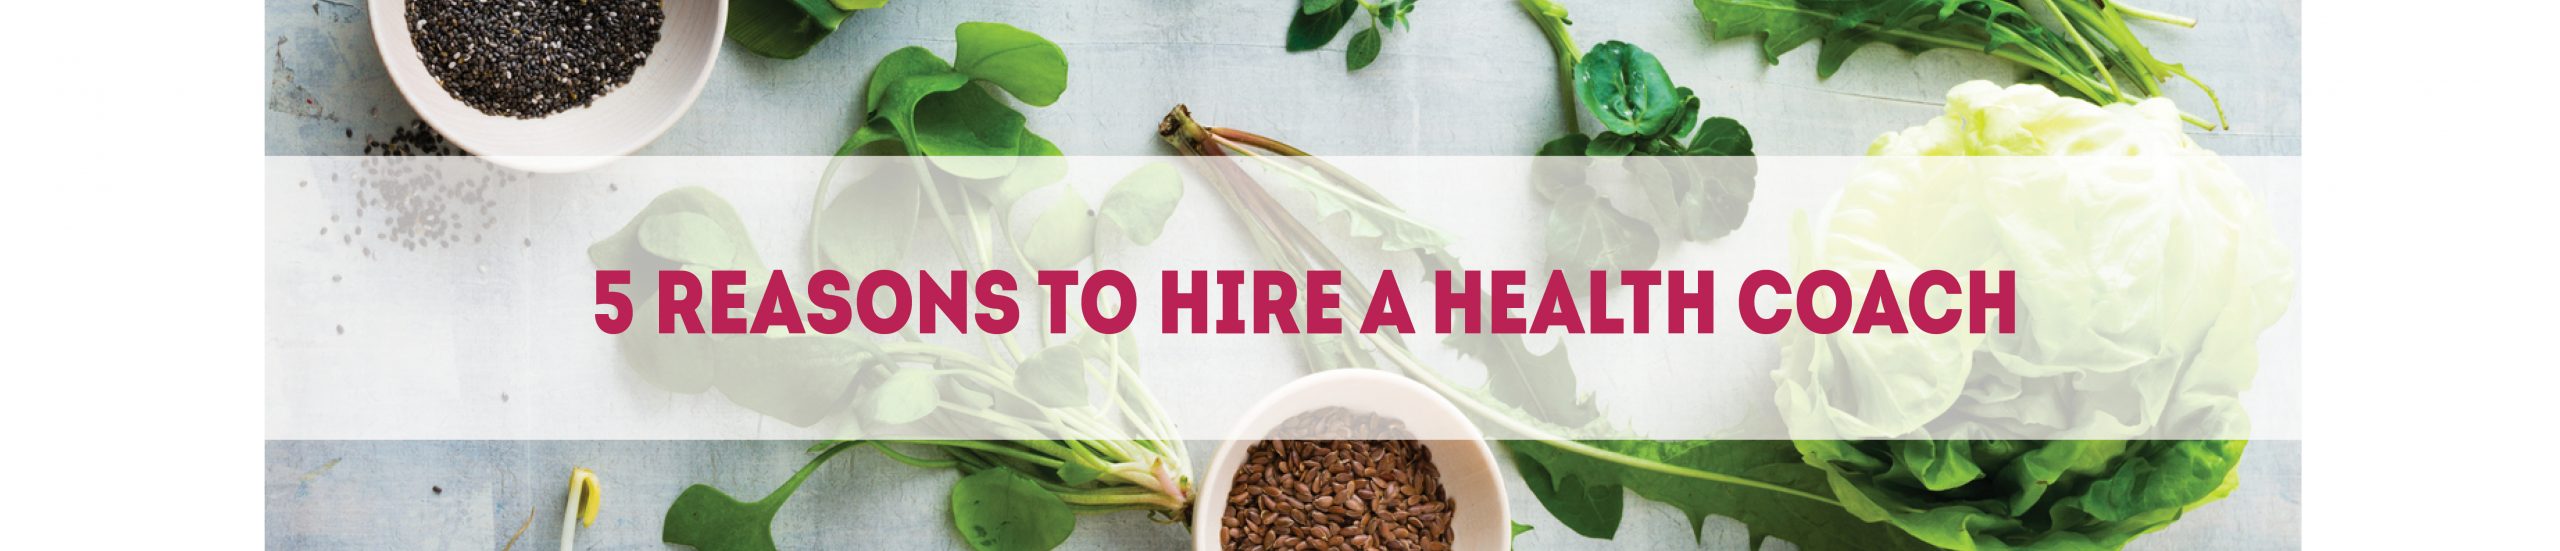 5 Reasons to Hire a Health Coach